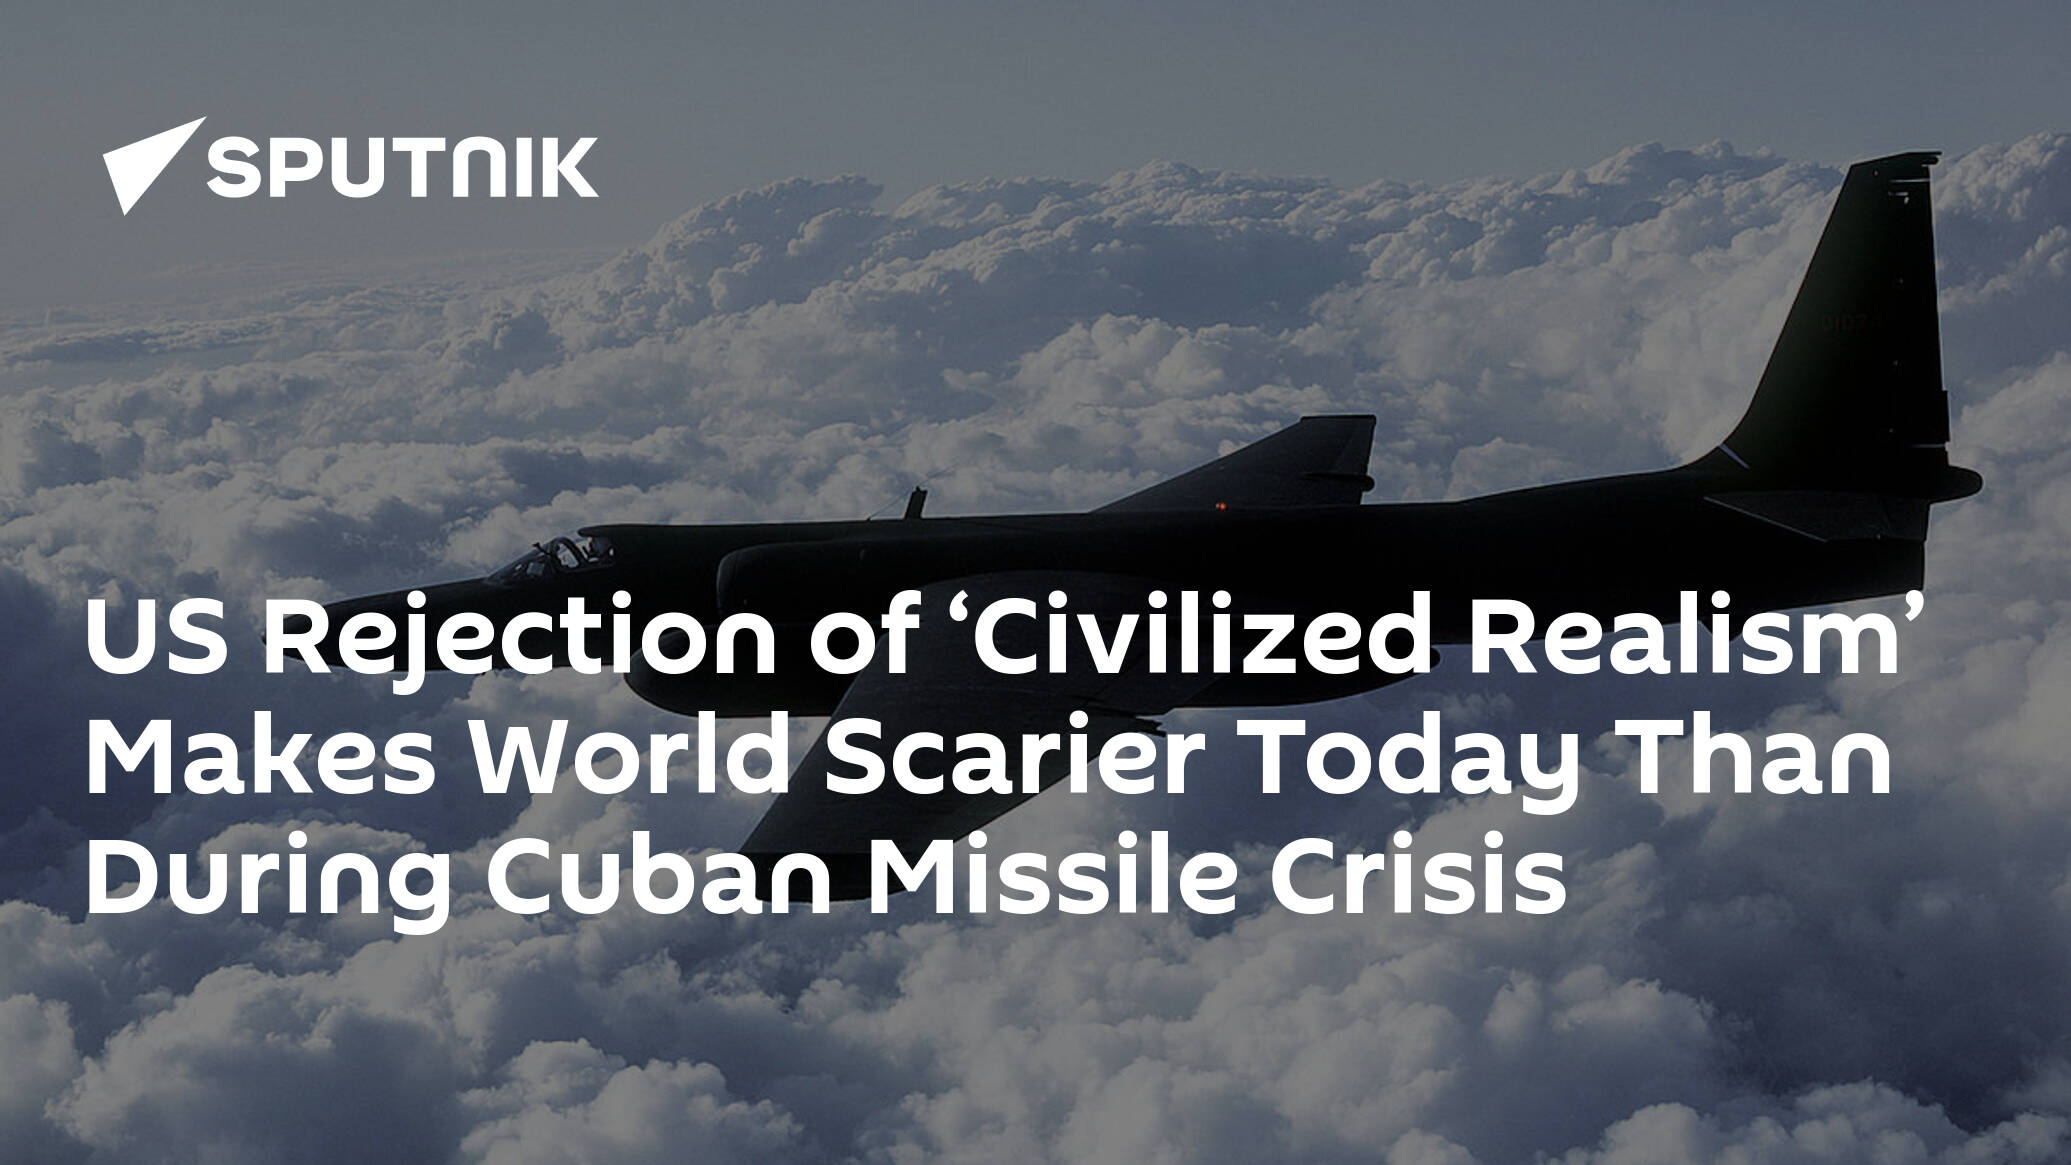 US Rejection of ‘Civilized Realism’ Makes World Scarier Today Than During Cuban Missile Crisis